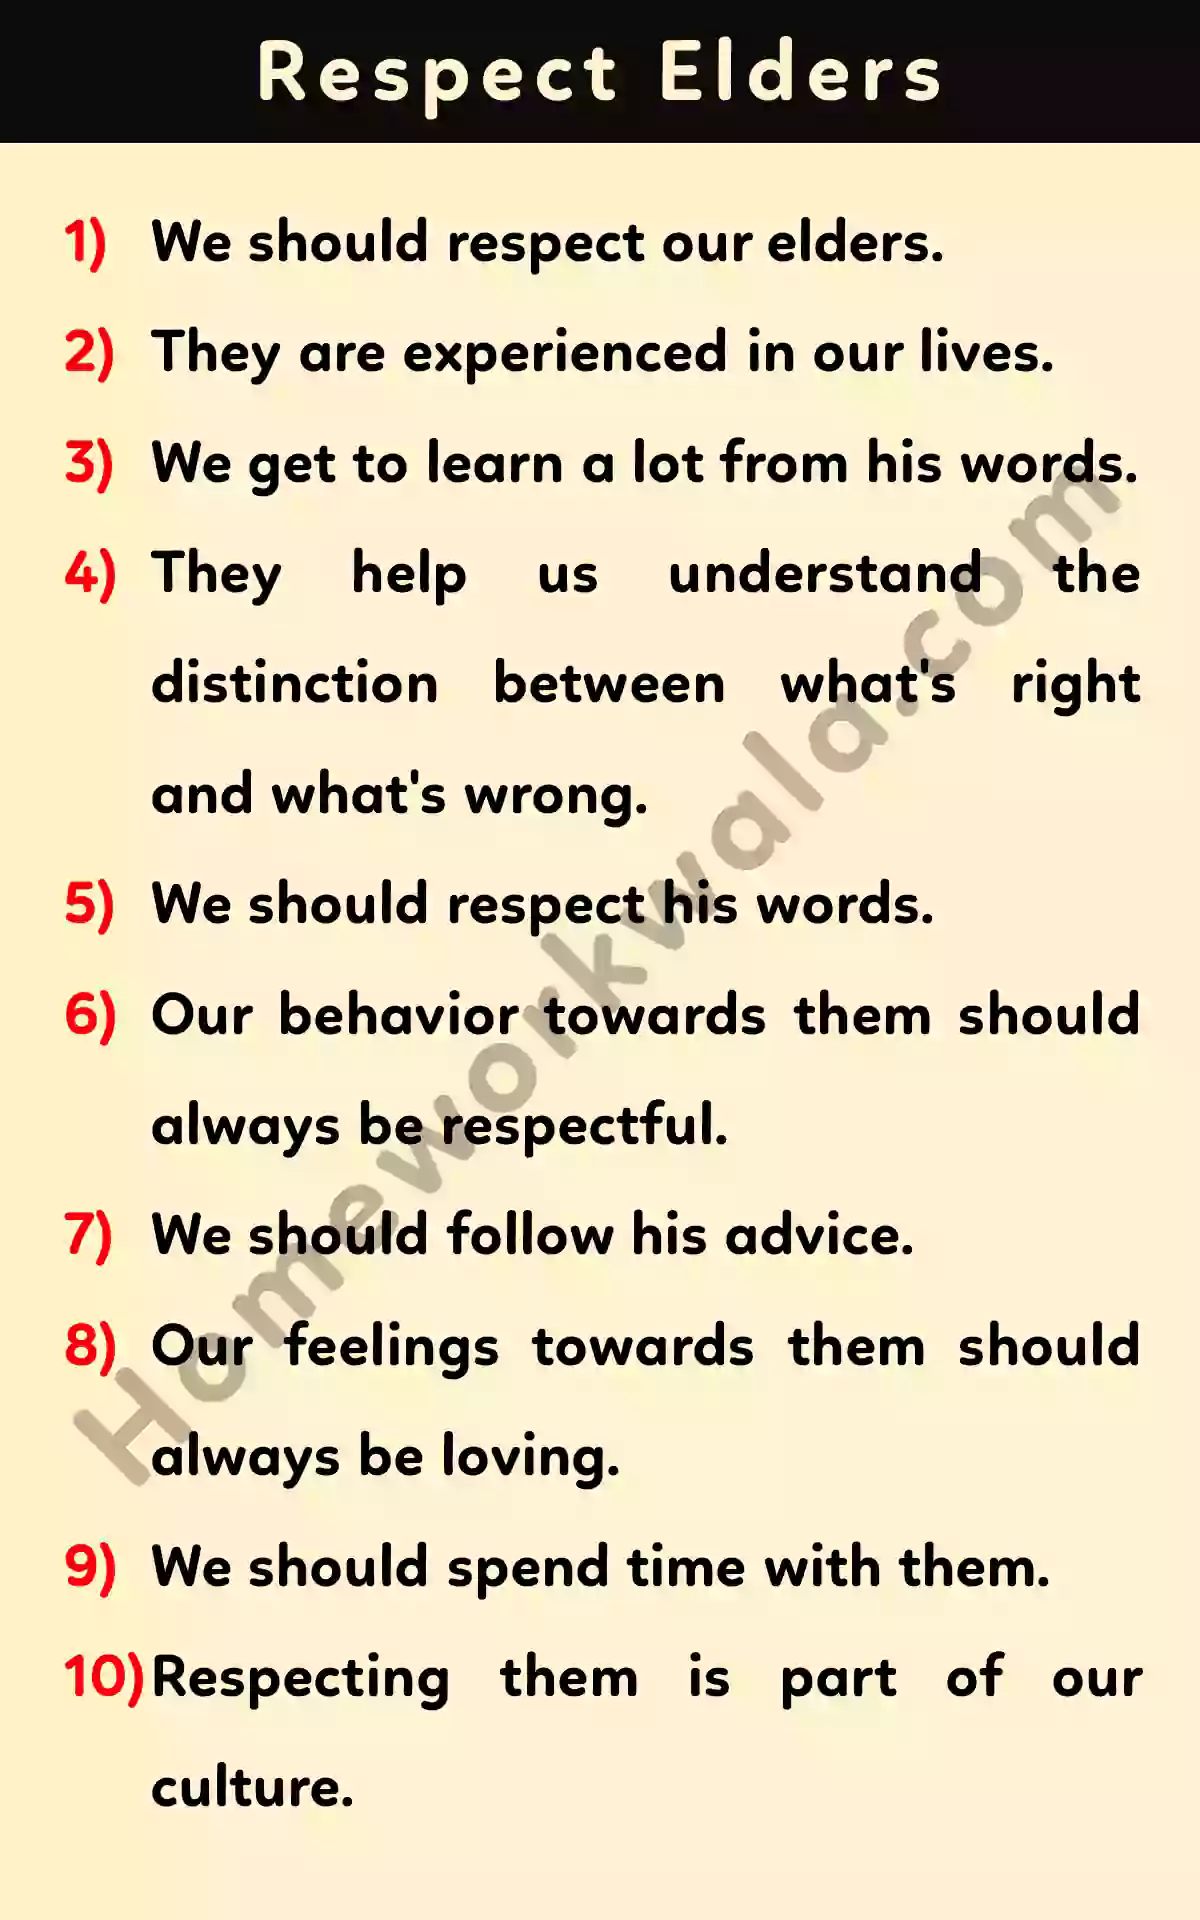 10 lines about Respect Elders